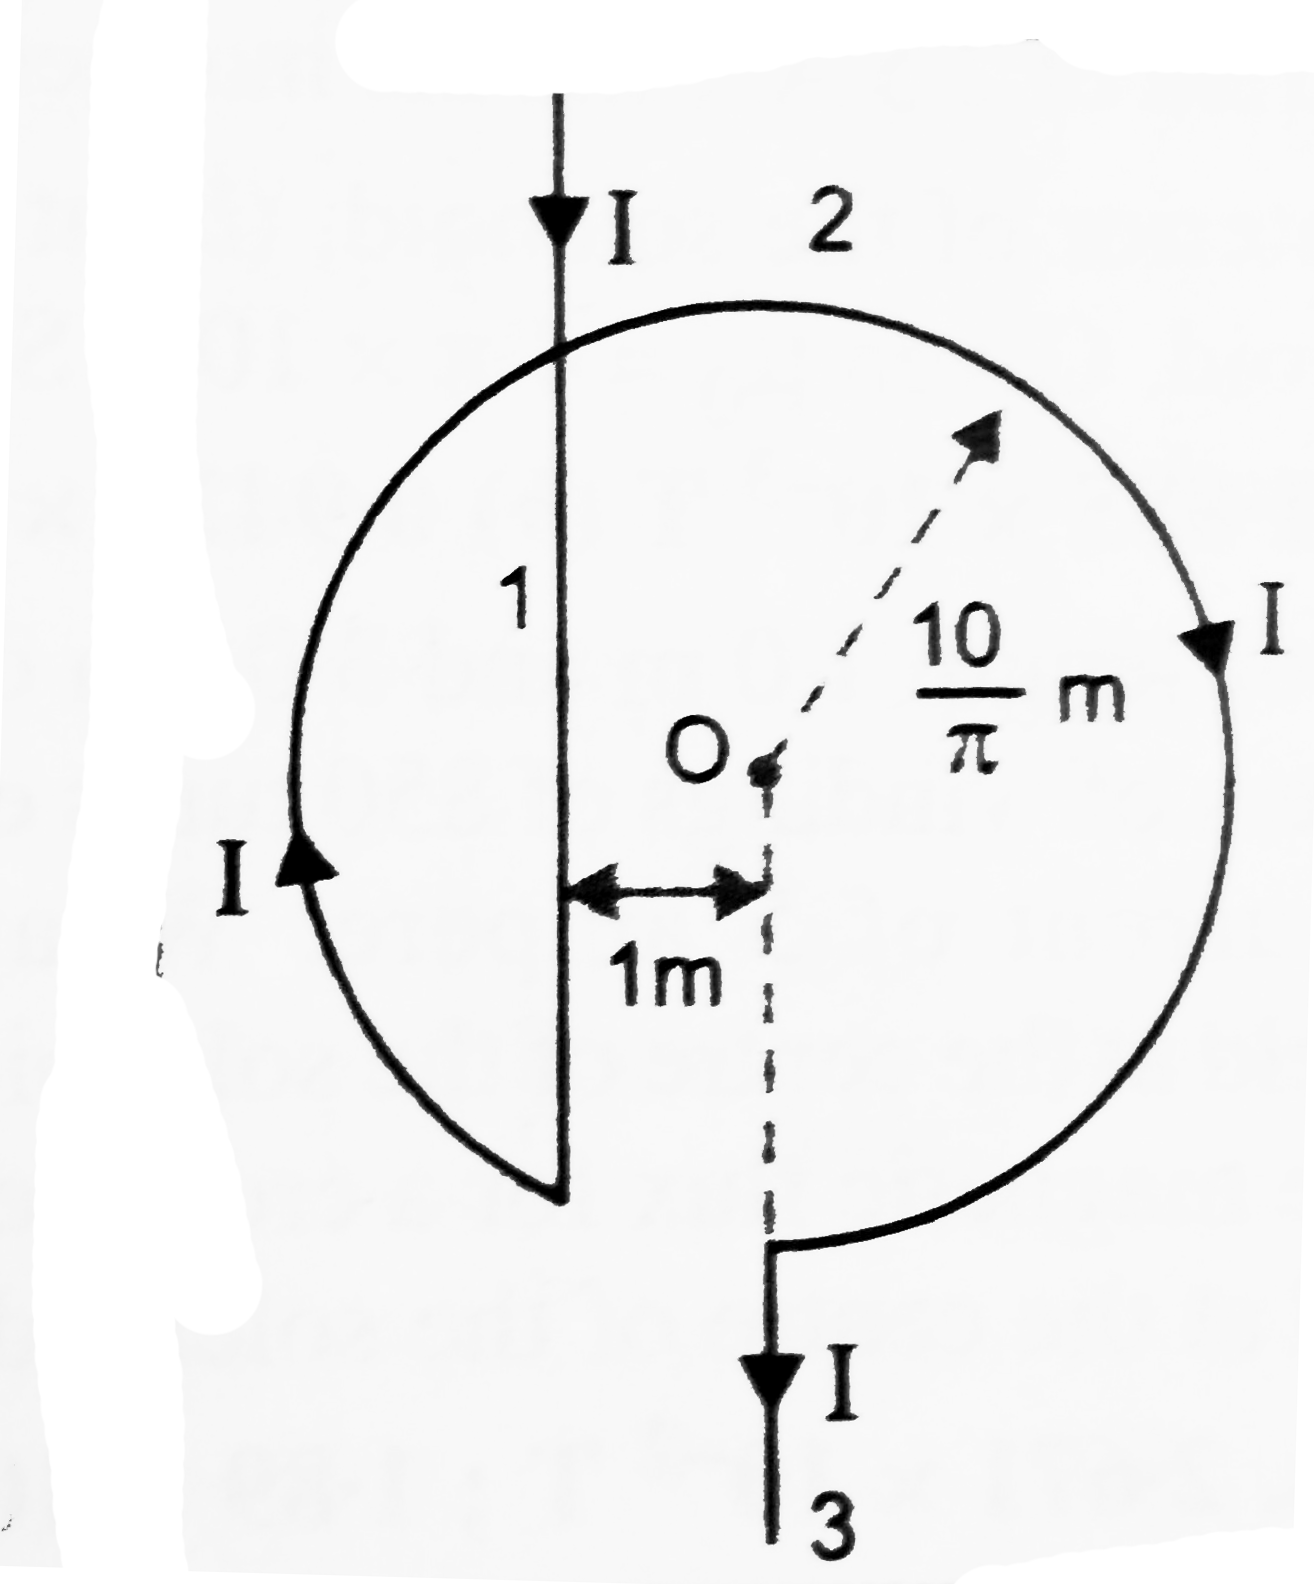 A long straight wire carrying current I is bent into the shape as shown in the figure. The circular portion of the wire has radius (10//pi)m. The centre of this circle is at a distance 1m from the straight portion of the wire. What is the magnitude of the magnetic field at the centre of the circular portion? Given pi^2=10.